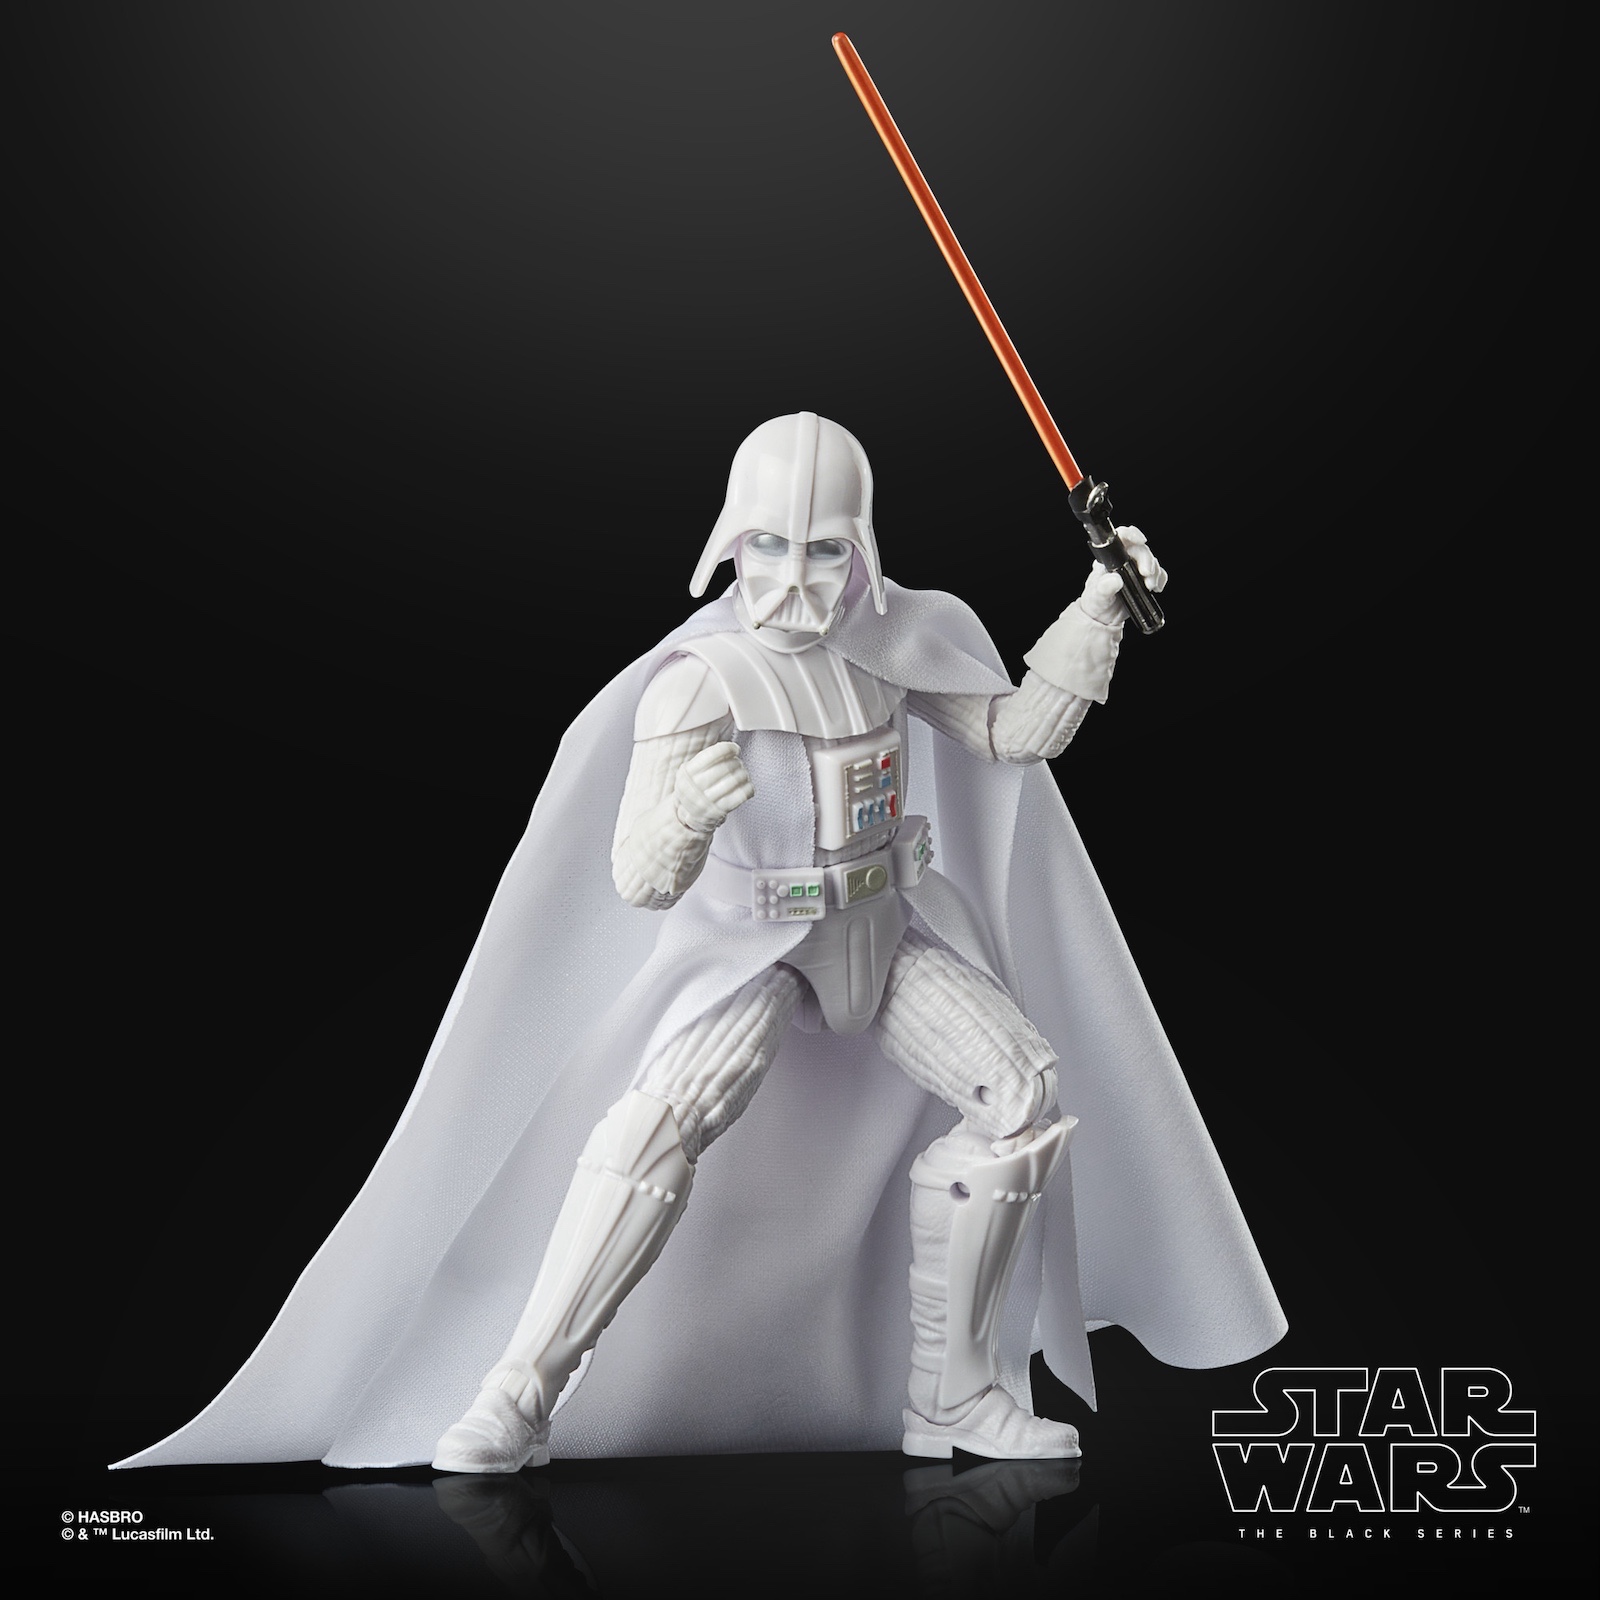 New Star Wars Vintage Collection and Black Series reveals